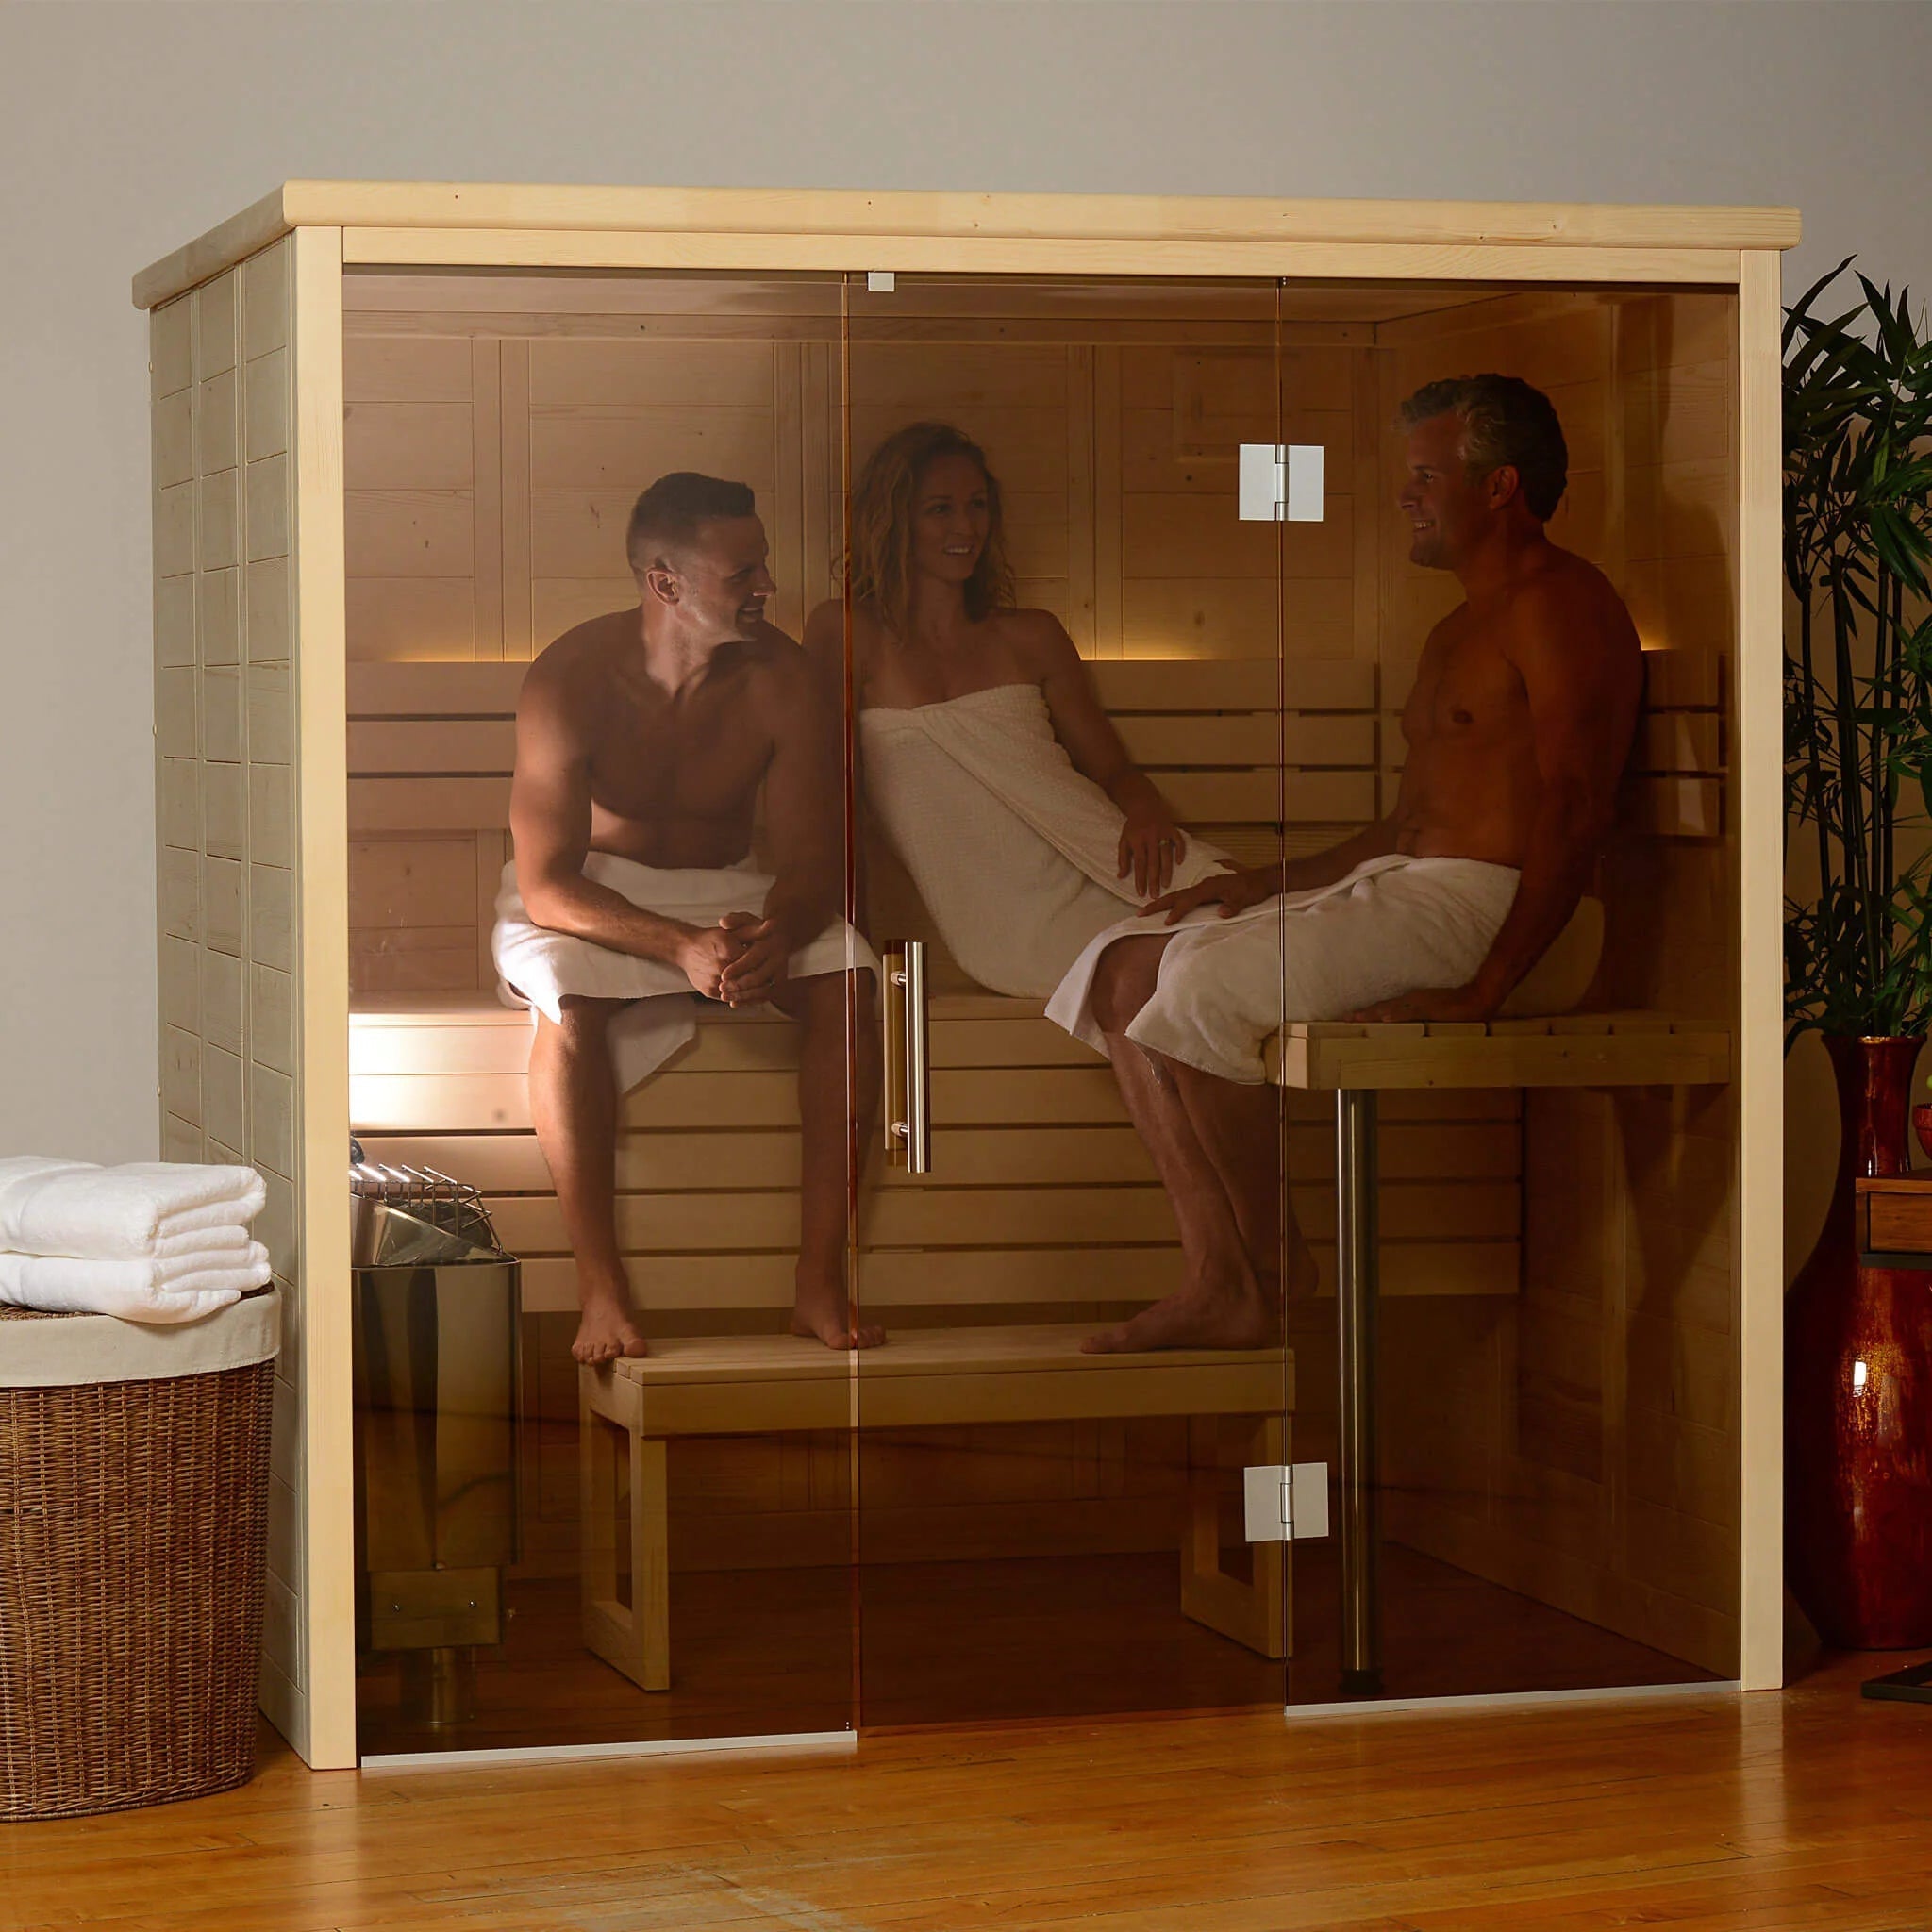 Almost Heaven Worthington 4-6 Person Indoor Traditional Sauna – Ships Within 2 Days!